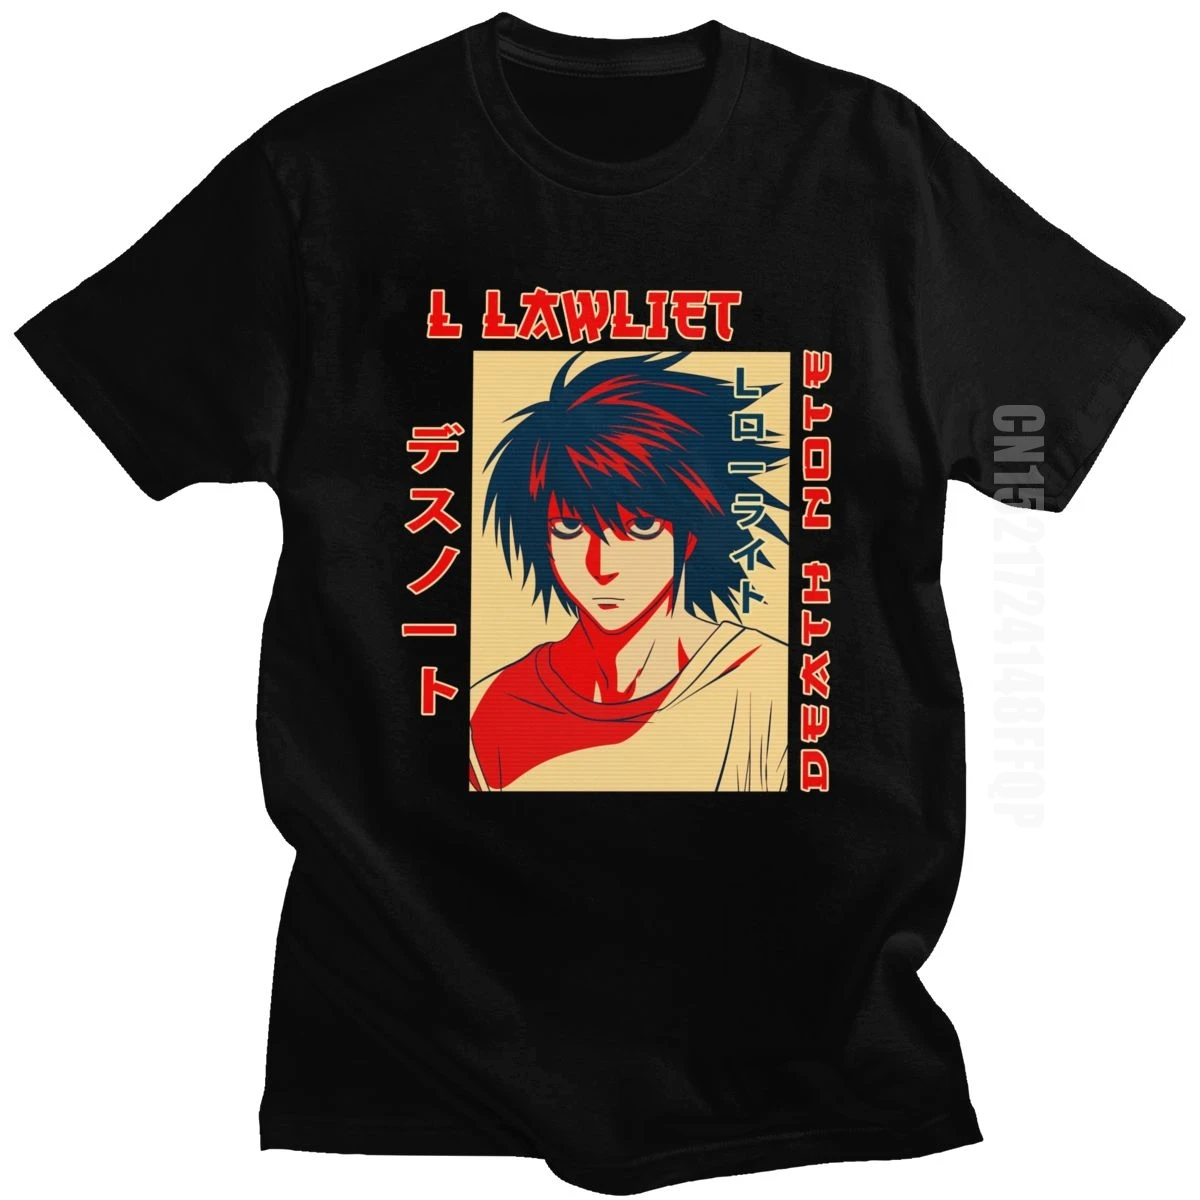 

Novelty Anime Death Note Tshirt for Men Print L Lawliet Tee Shirt Graphic Pure Cotton Mystery Manga T-shirt Clothes Guys Gift